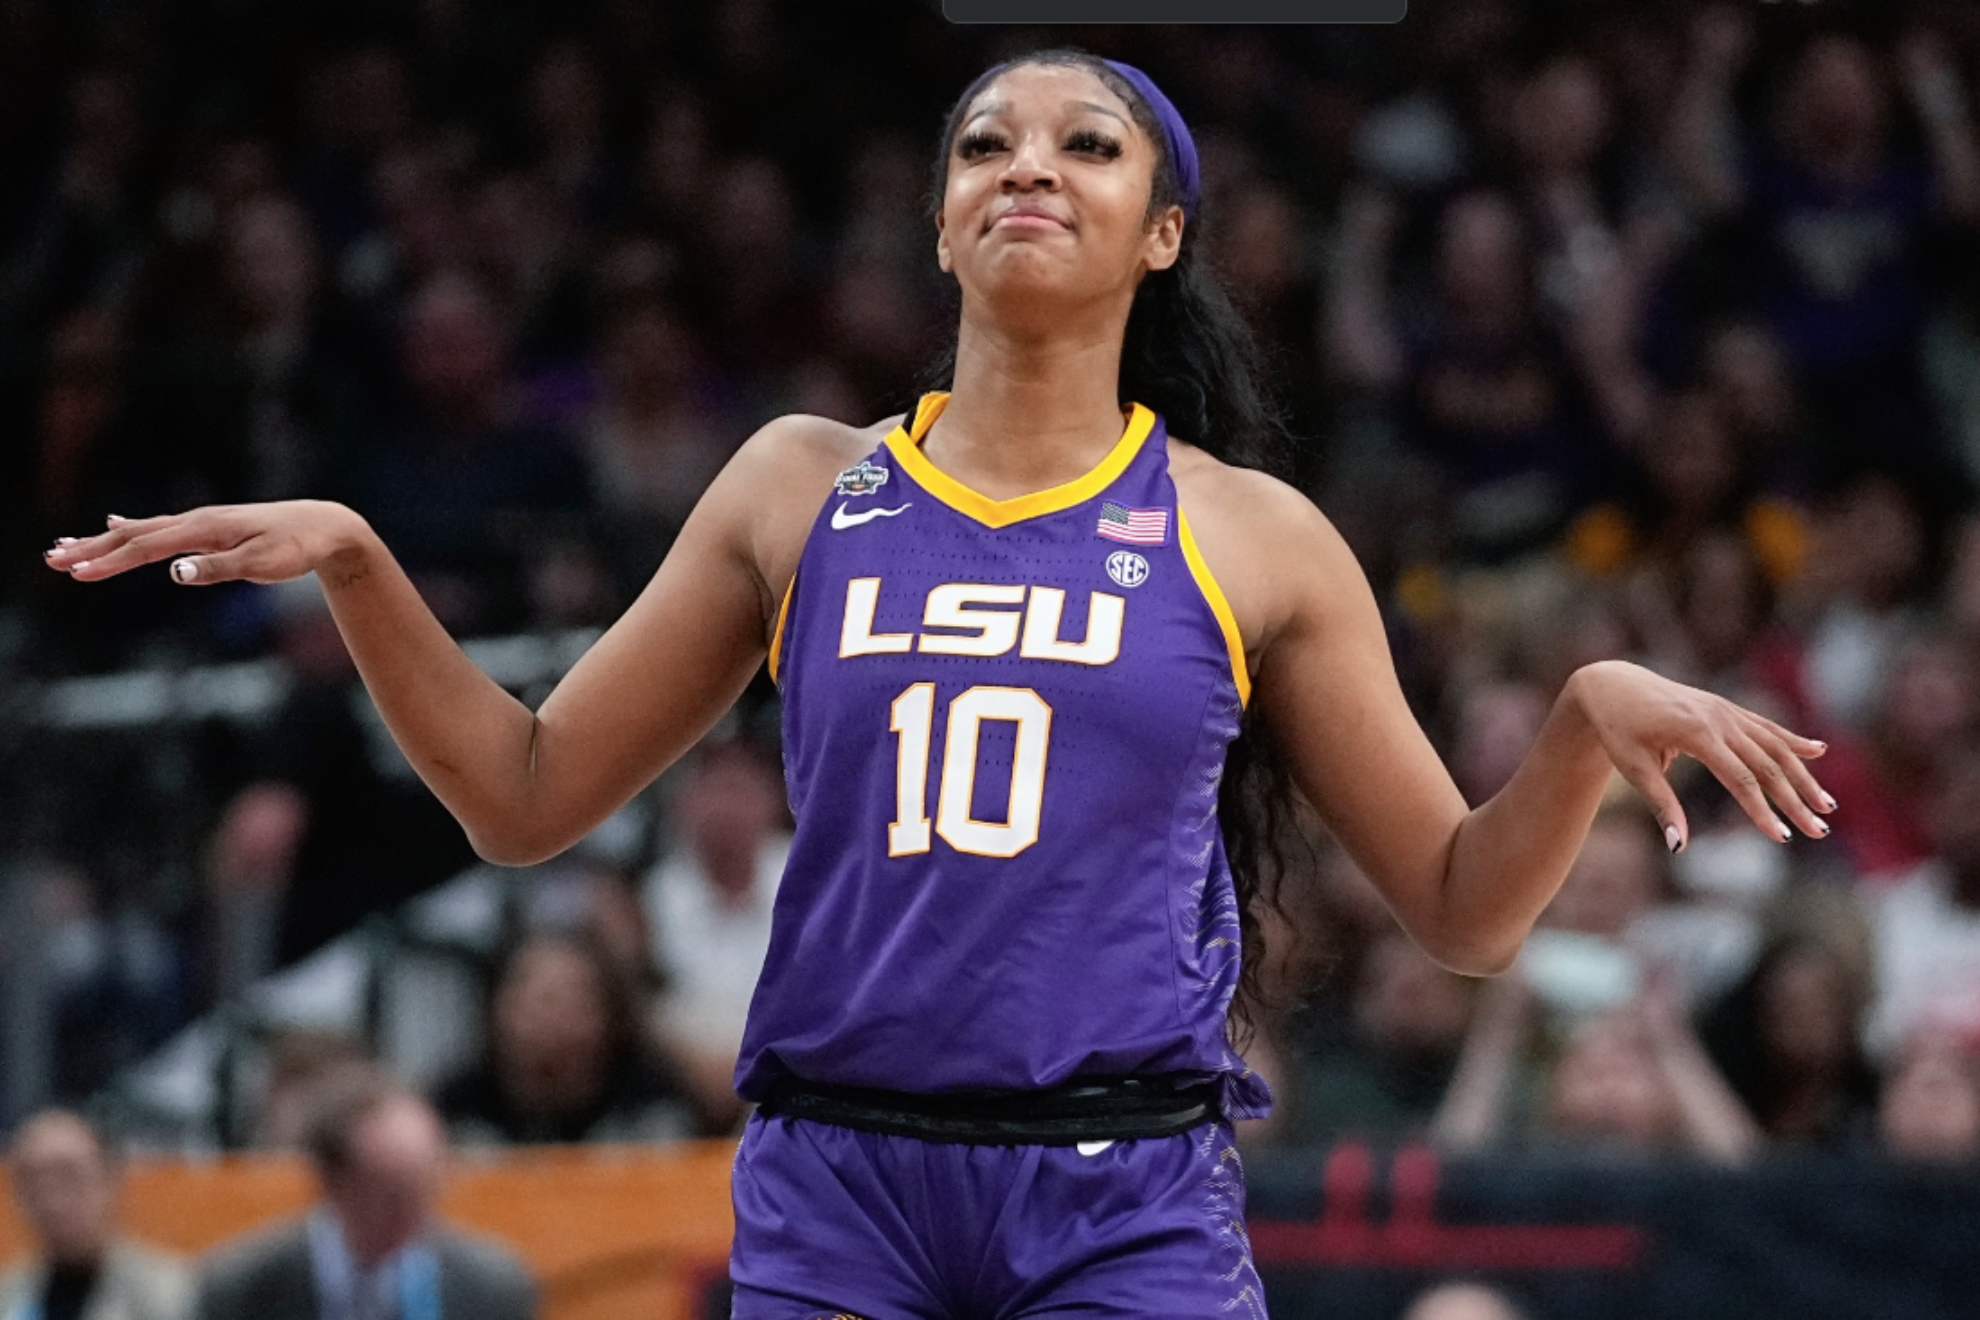 Angel Reese shows photos that reveal her possible future away from LSU and WNBA